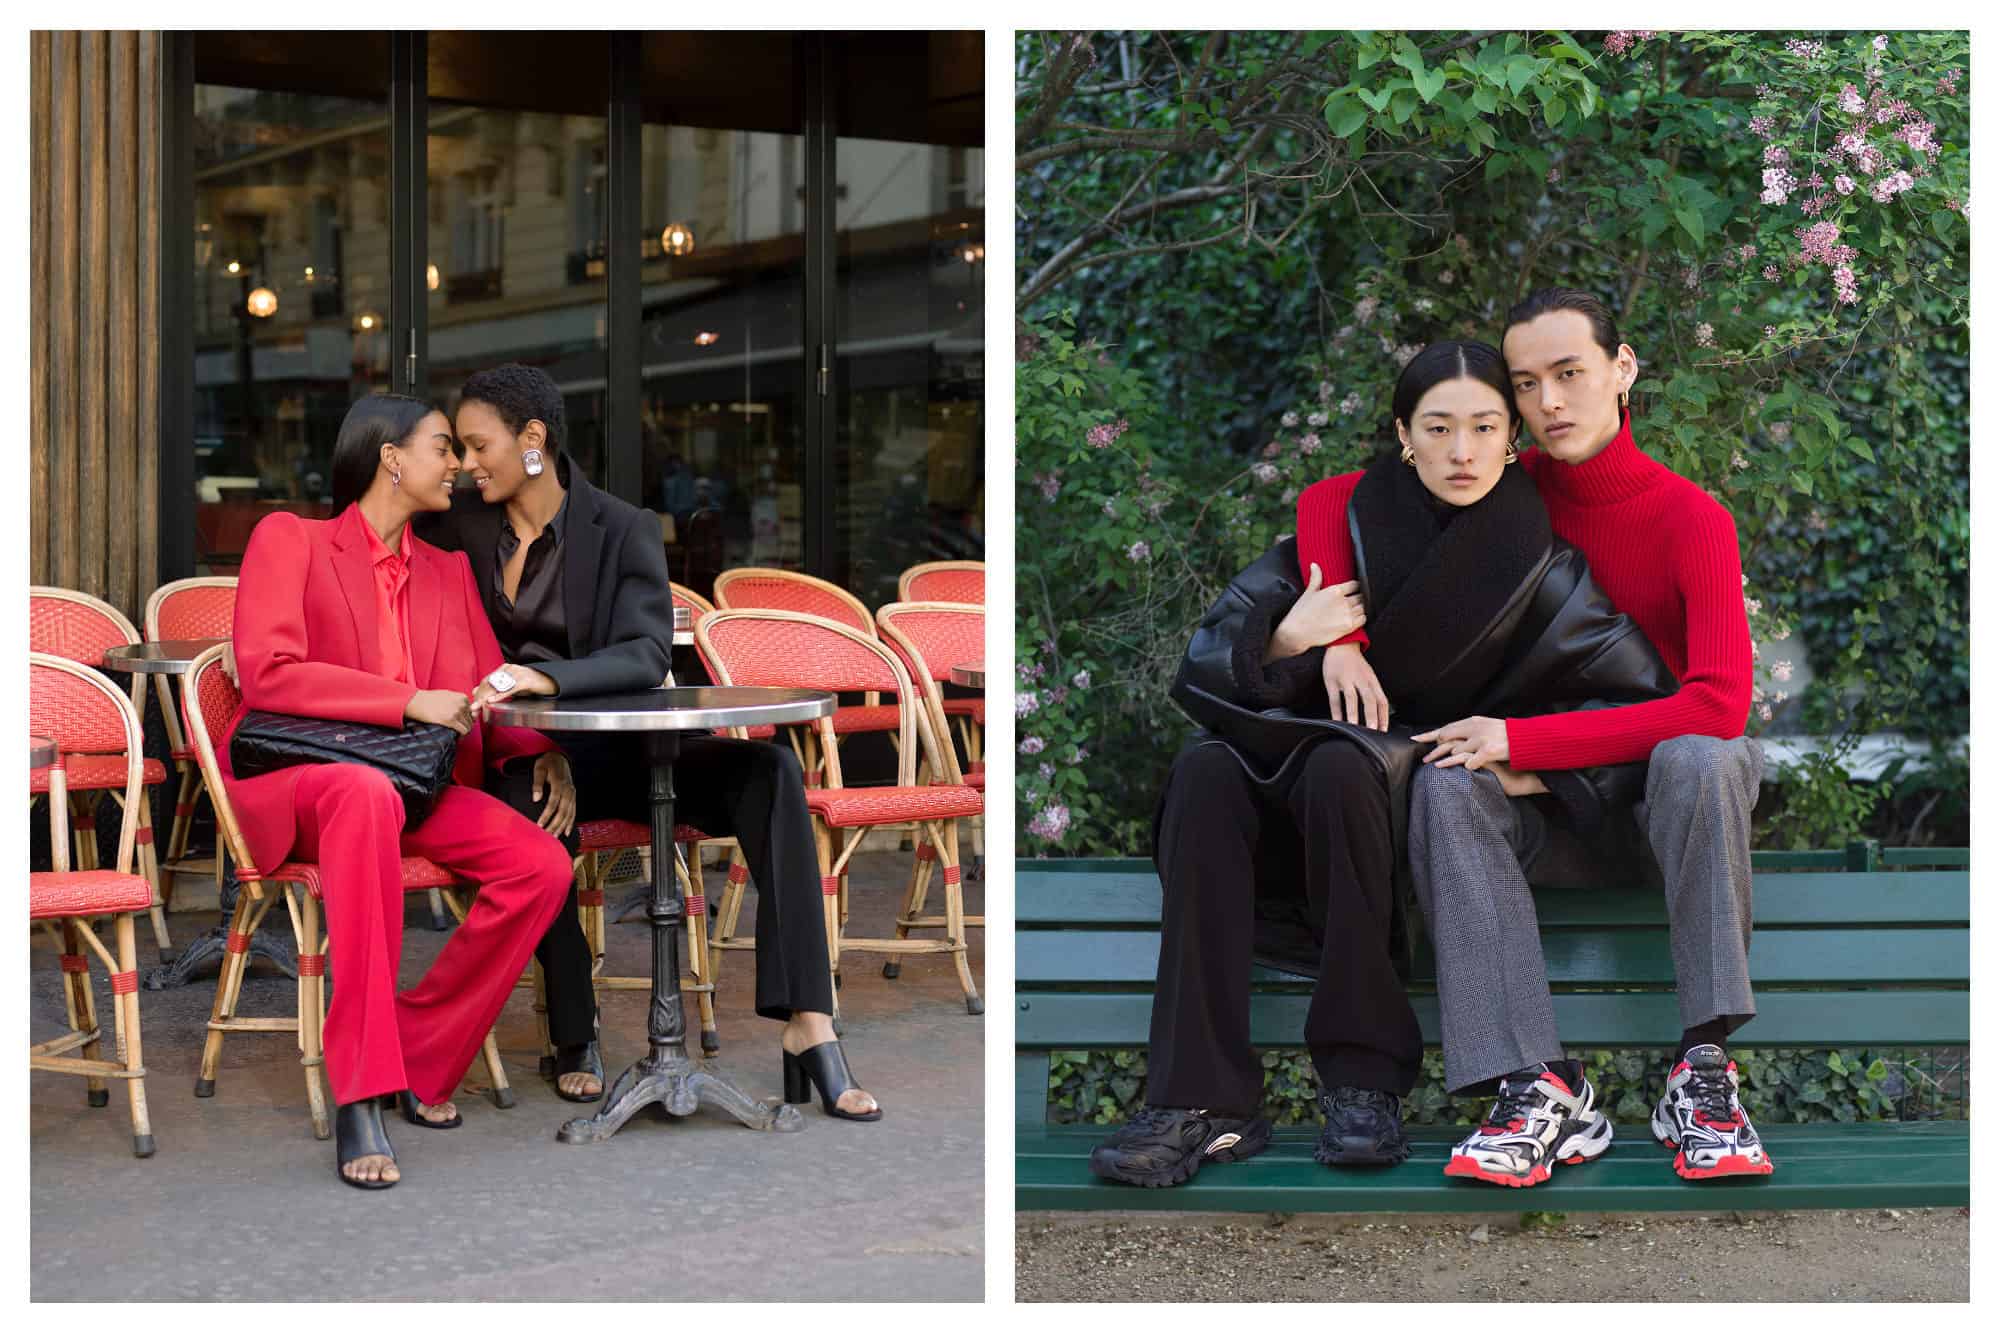 Two women at a Parisian bistro wearing red and black suits (left) and a man and woman sat on a bench wearing red and black from Paris Fashion Week by Balenciaga.